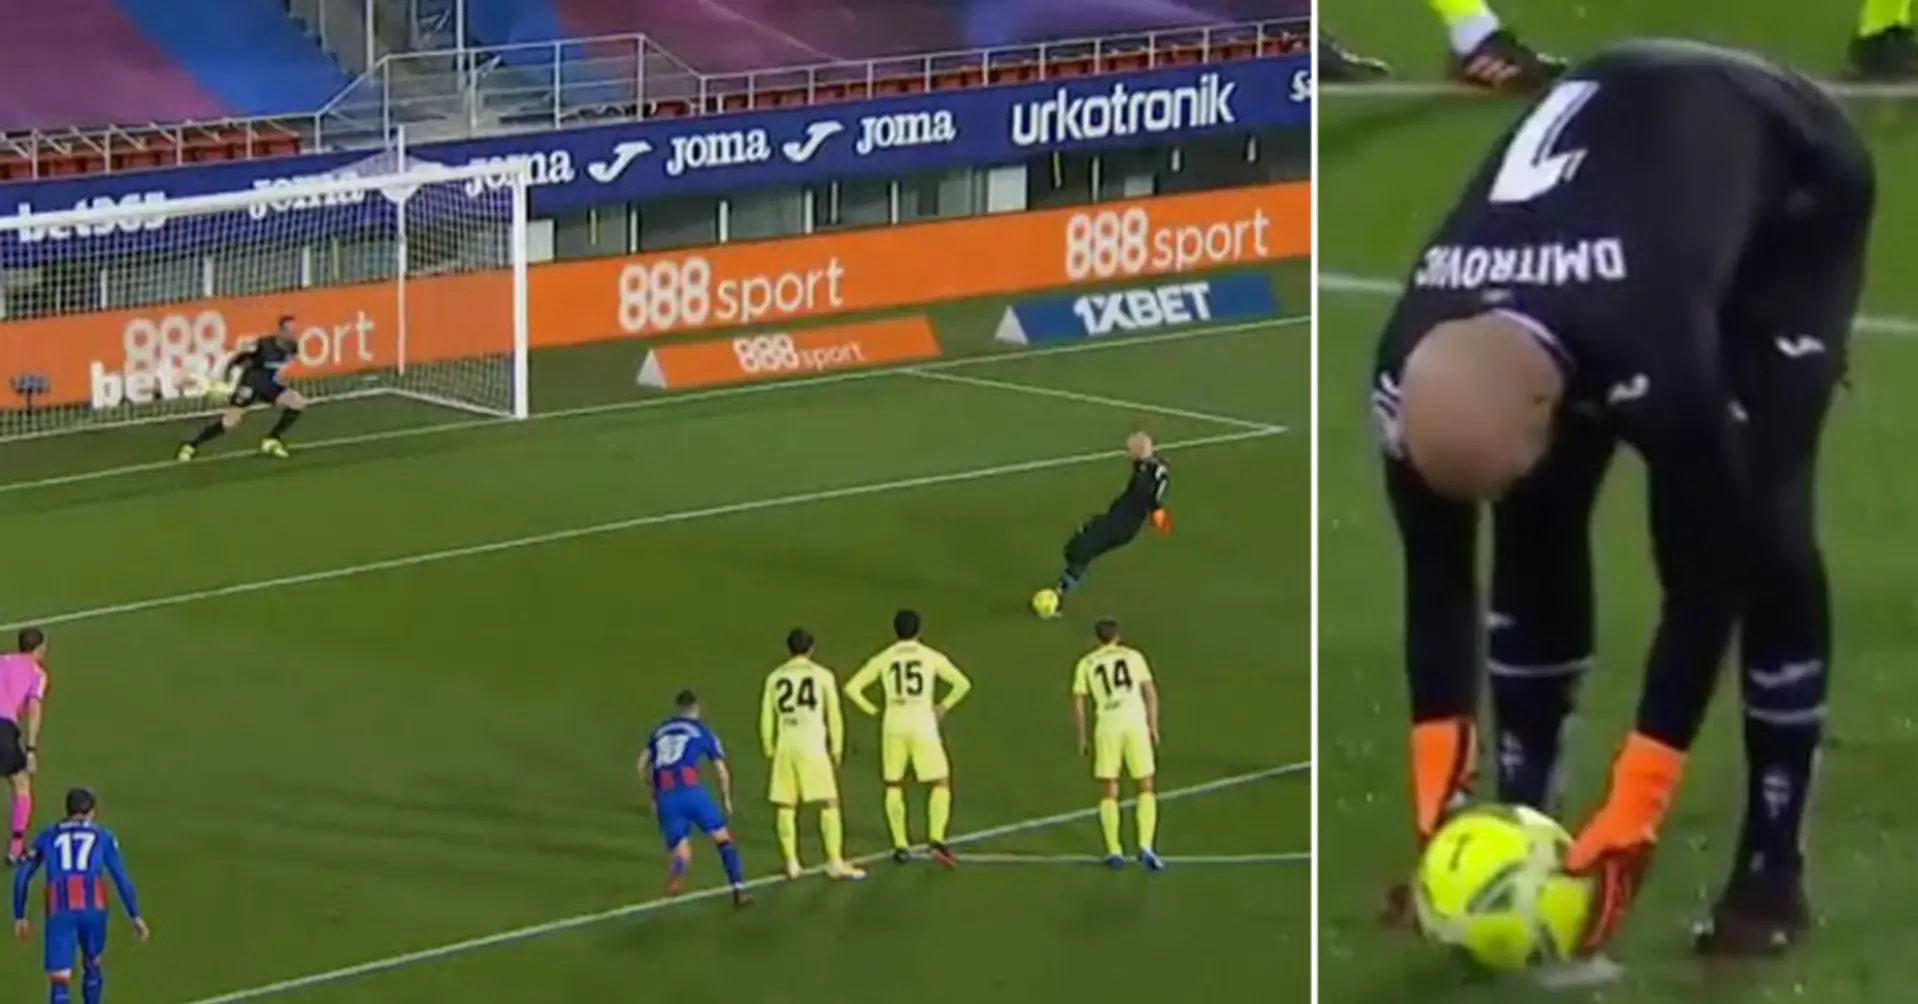 Eibar goalkeeper scores against Jan Oblak, becomes first to score a goal in 10 years